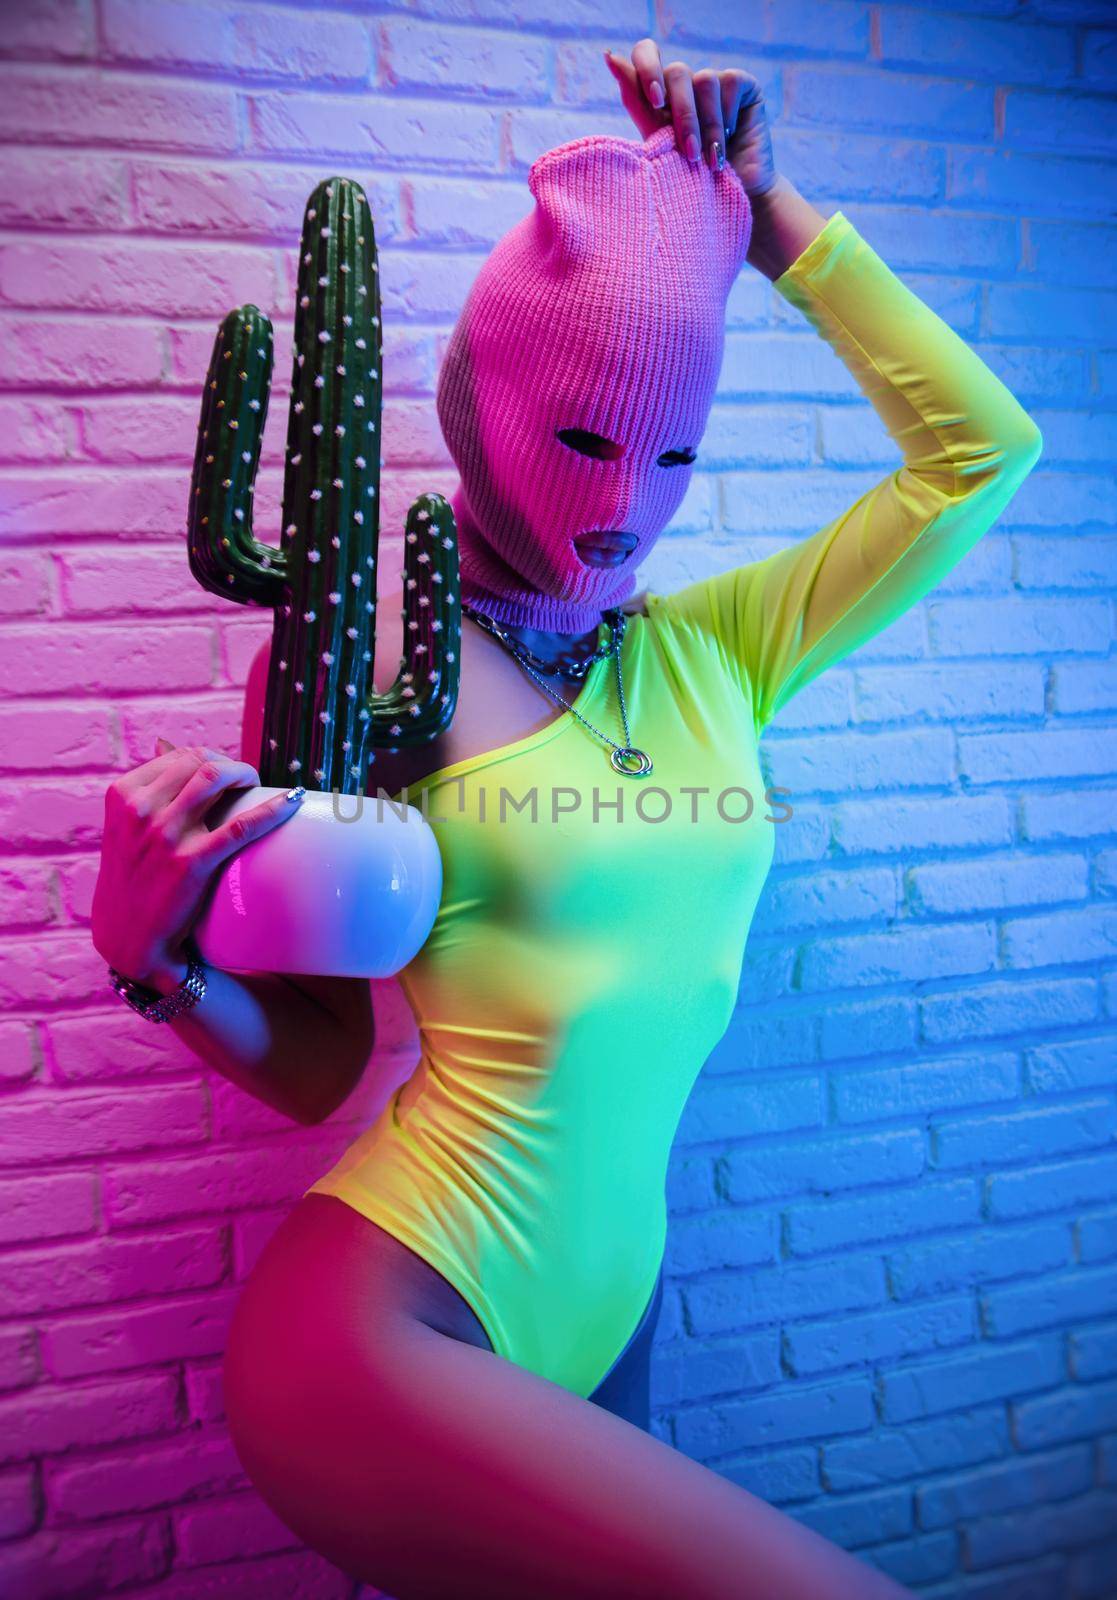 the sexy woman in pink mask with cactus on white brick wall background in neon light